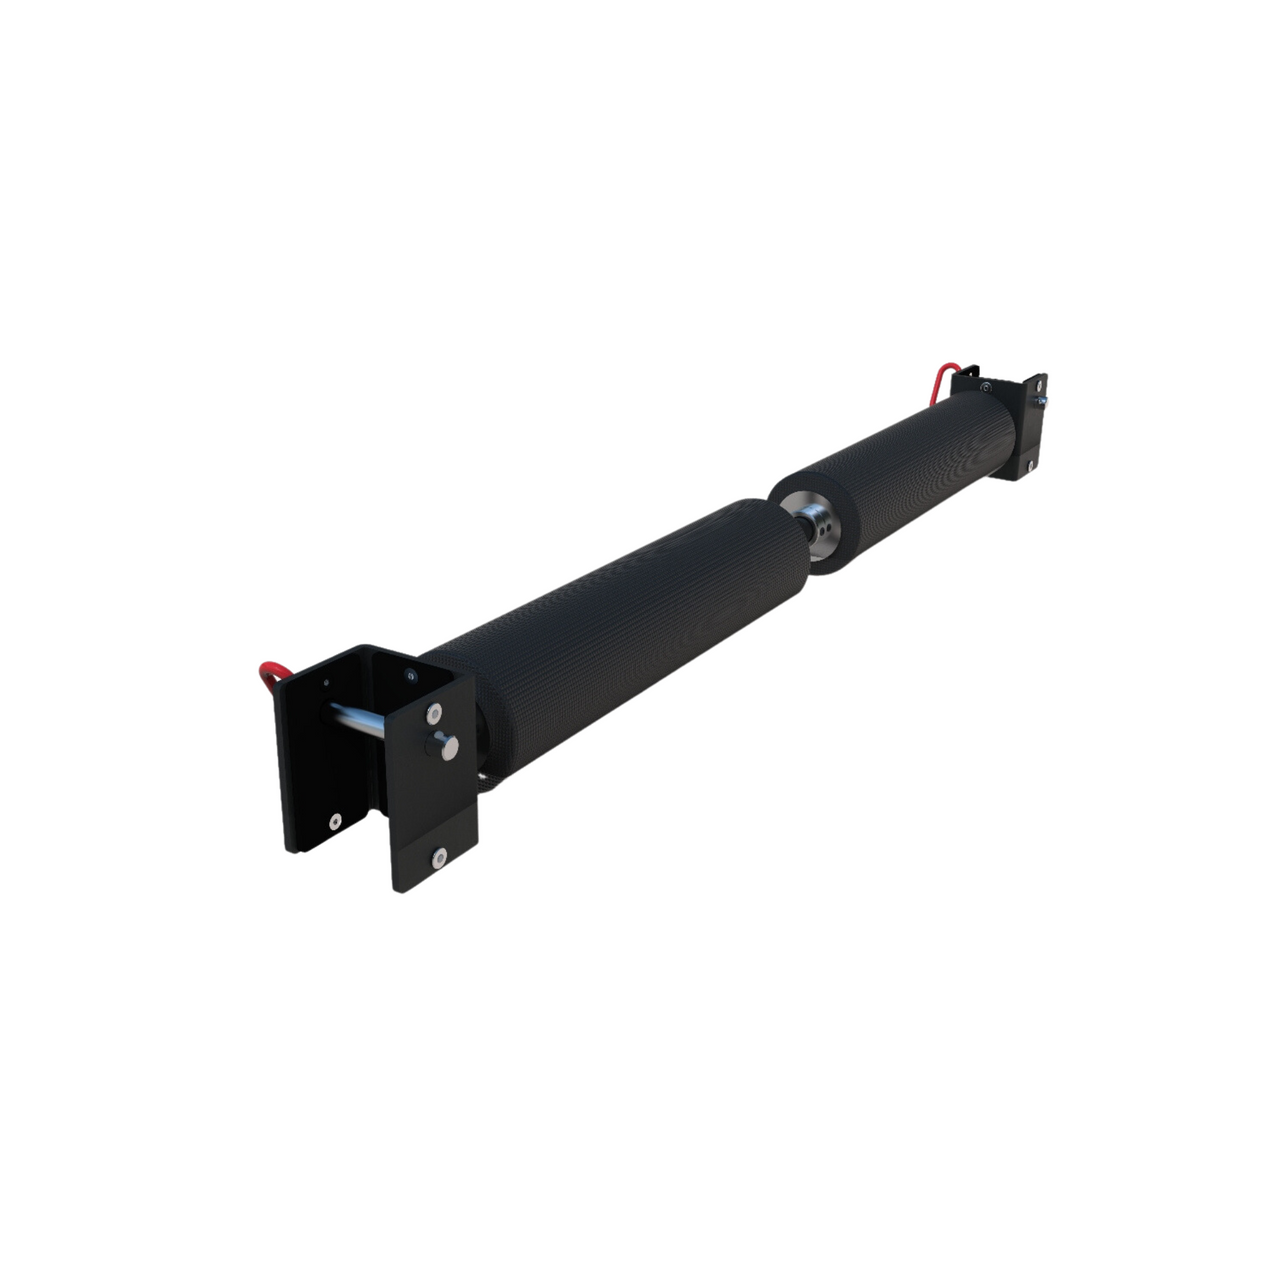 VULCAN Leg Roller Attachment for Commercial Power Rack & Rig Uprights | IN STOCK